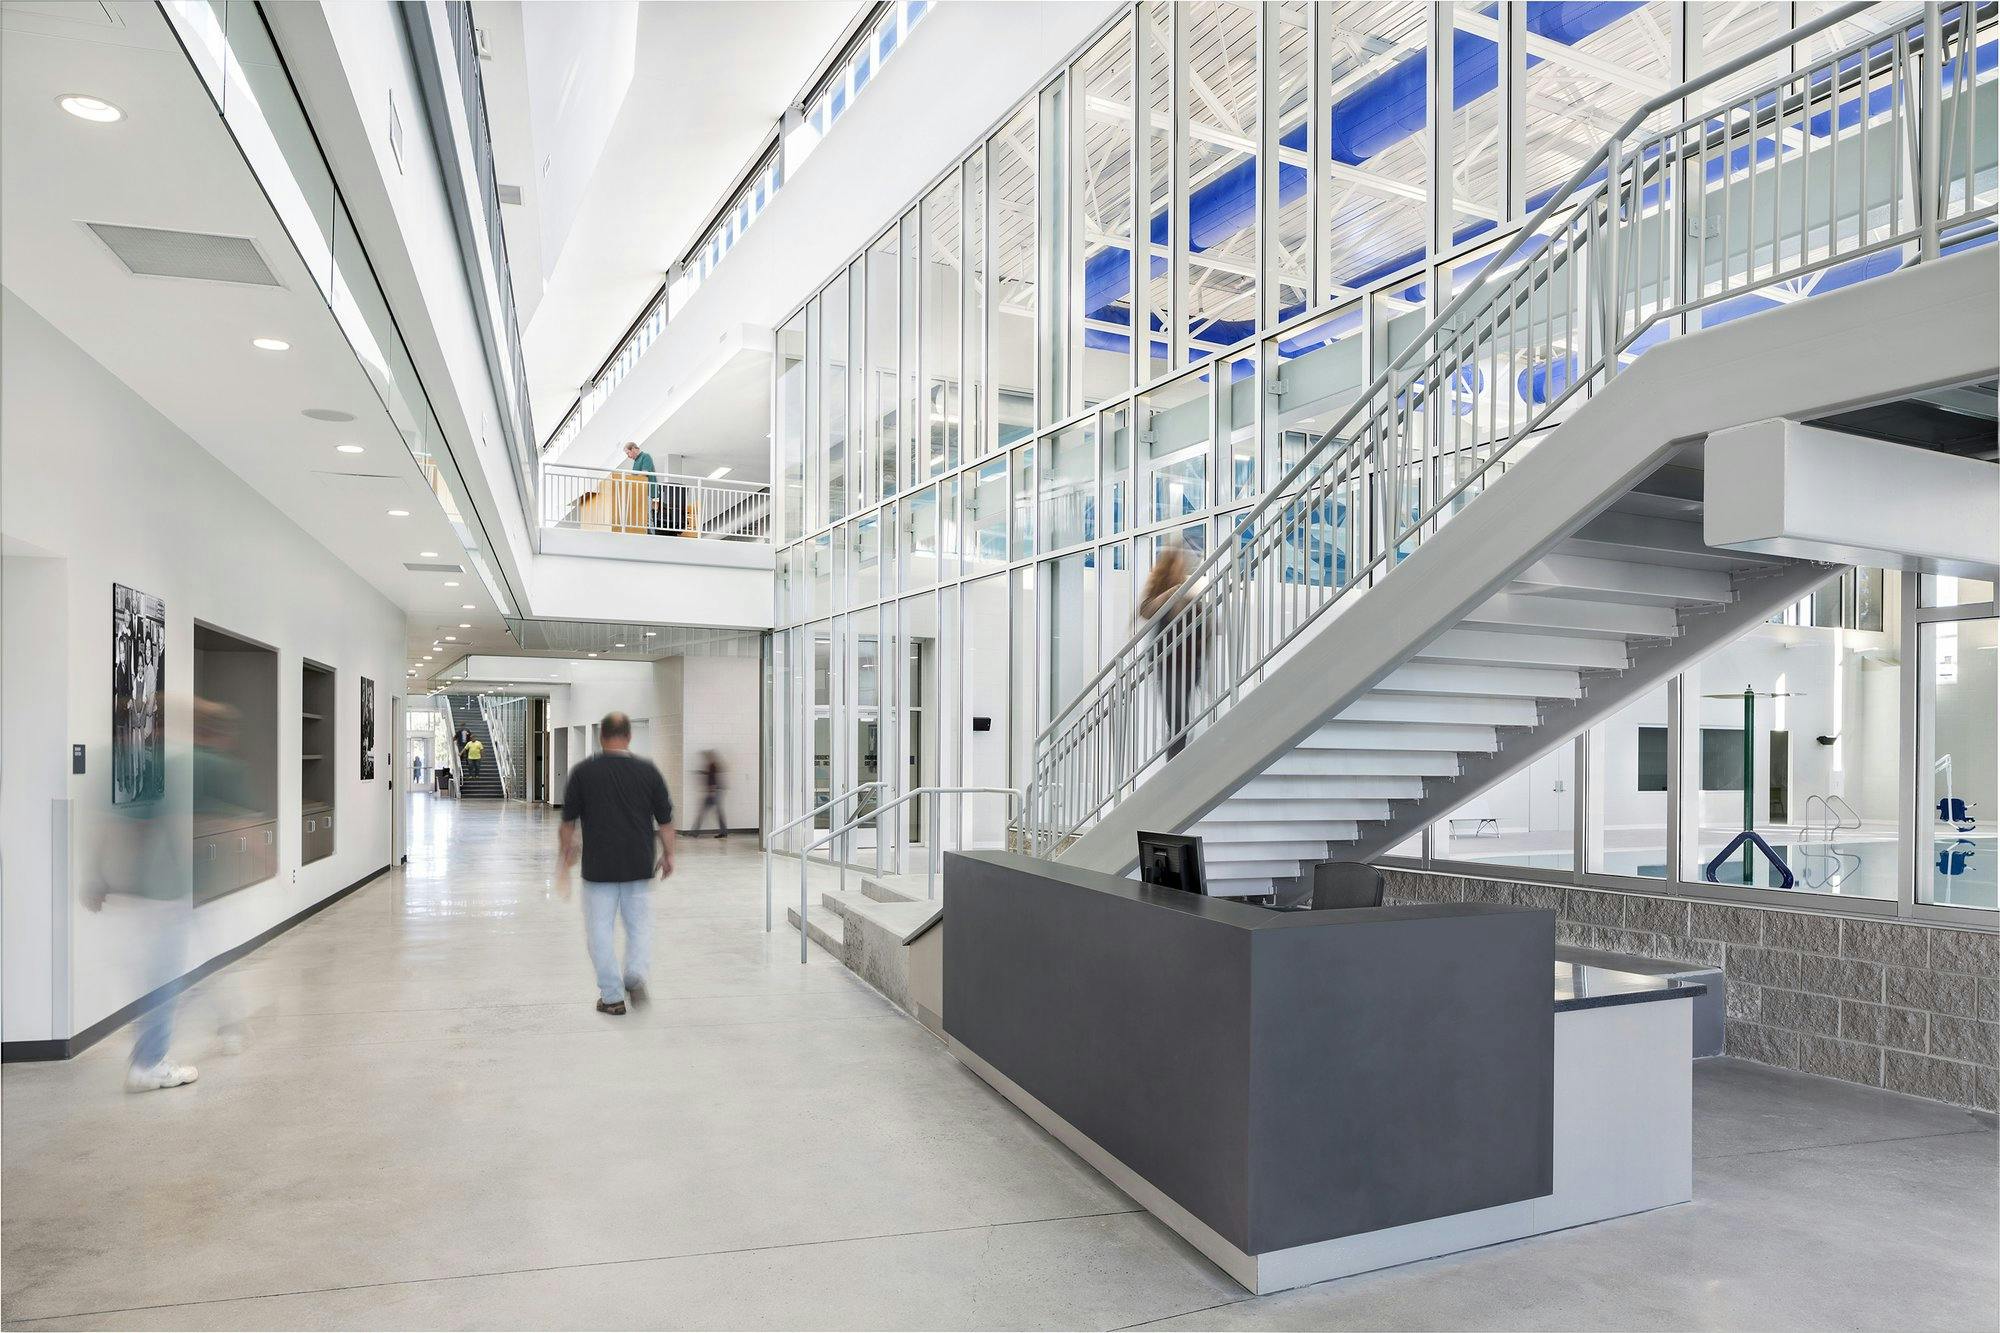 atrium of a recreation center showing a staircase leading to the second floor, artwork on the walls, and recreation rooms